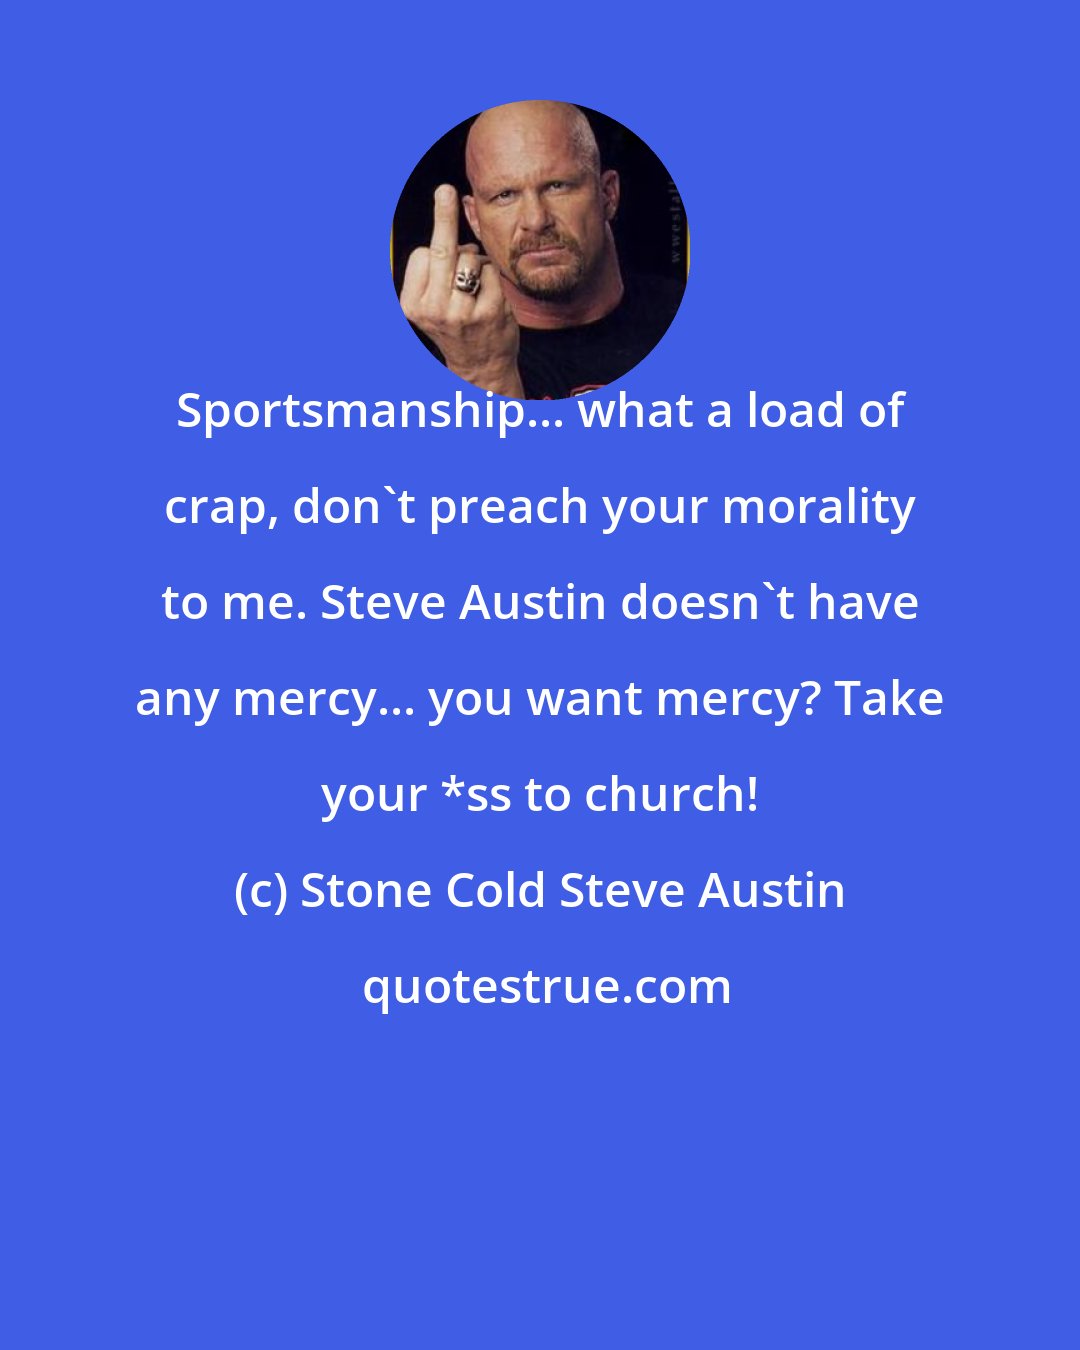 Stone Cold Steve Austin: Sportsmanship... what a load of crap, don't preach your morality to me. Steve Austin doesn't have any mercy... you want mercy? Take your *ss to church!